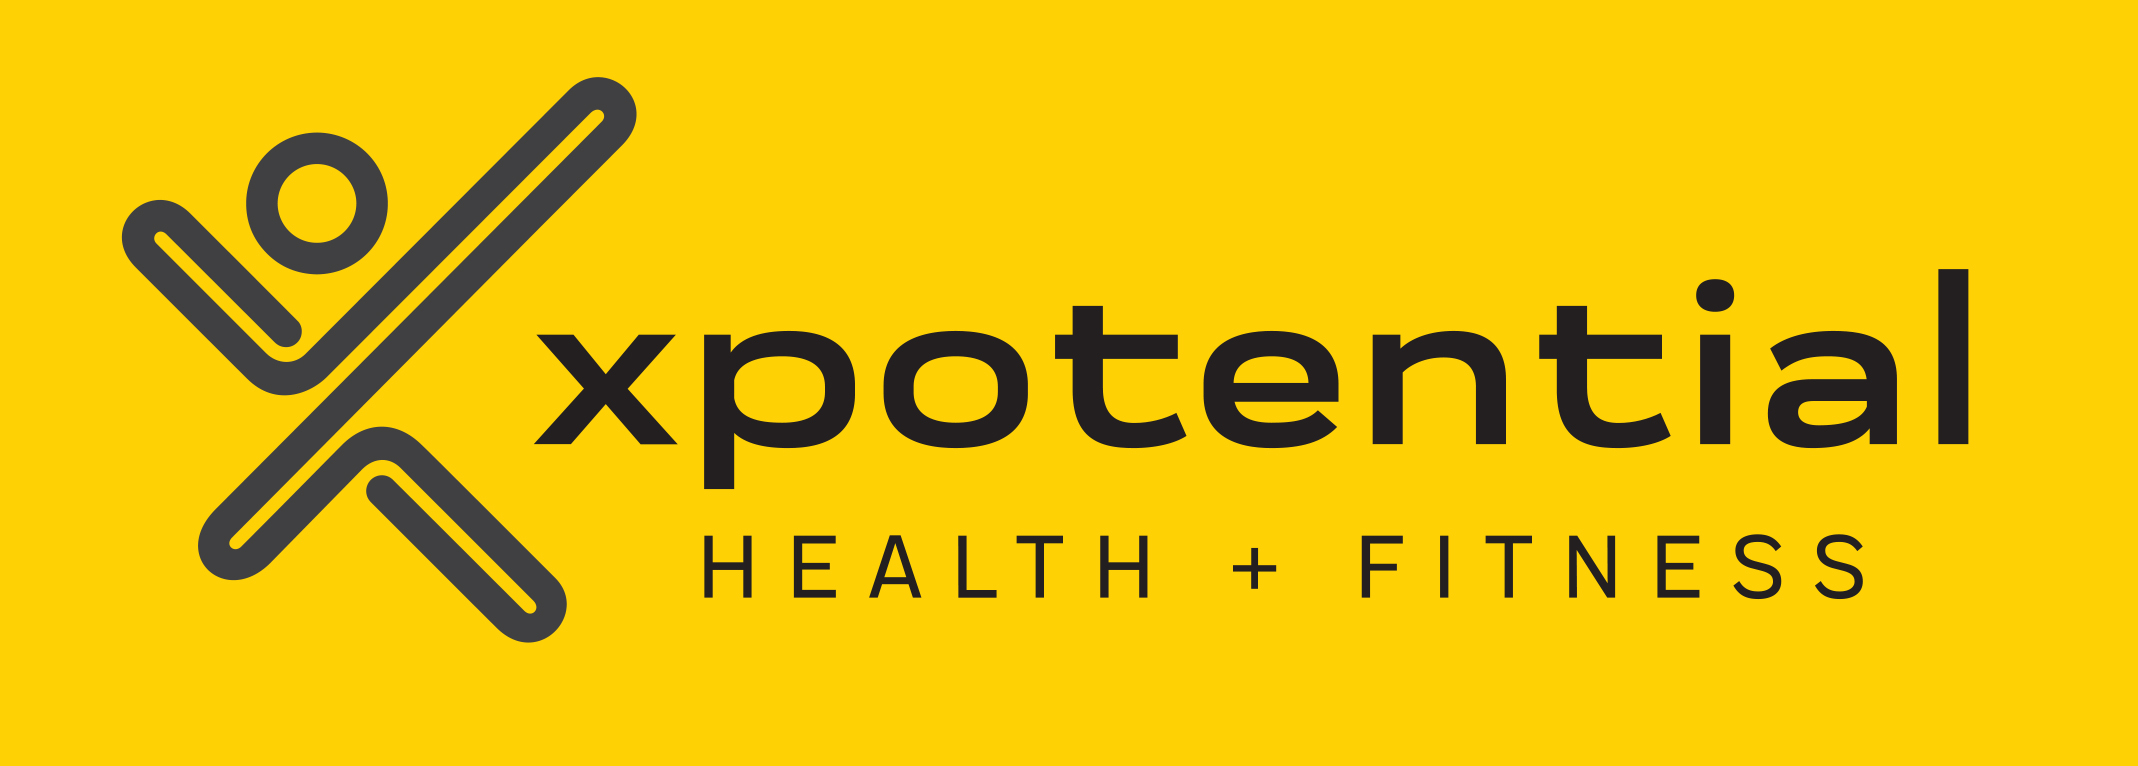 xpotential Health & Fitness